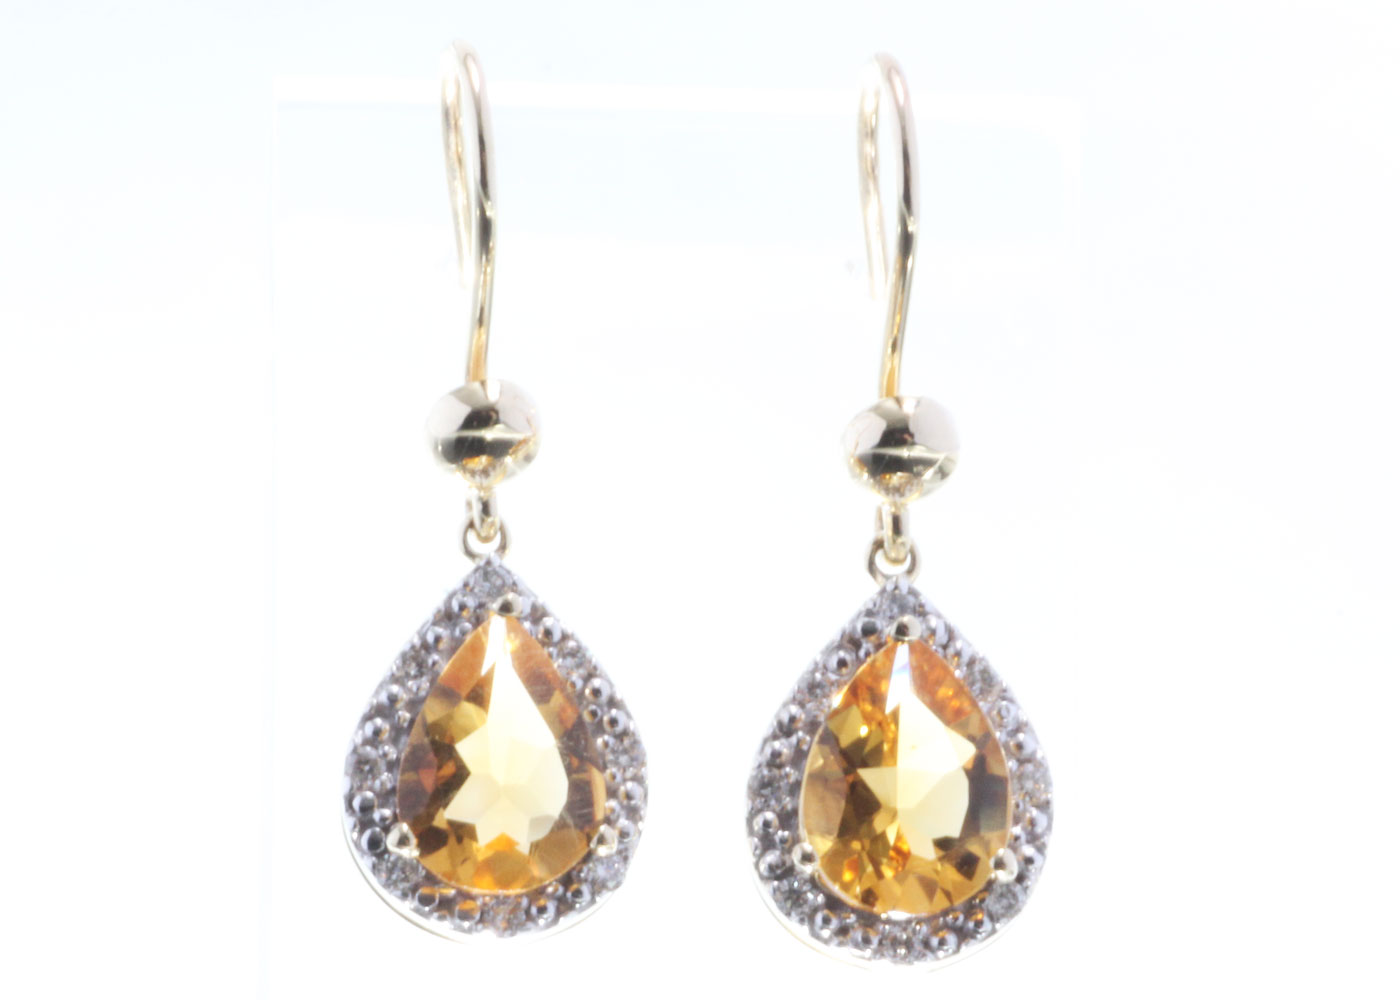 9ct Yellow Gold Citrine Diamond Earring 0.13 Carats - Image 2 of 2